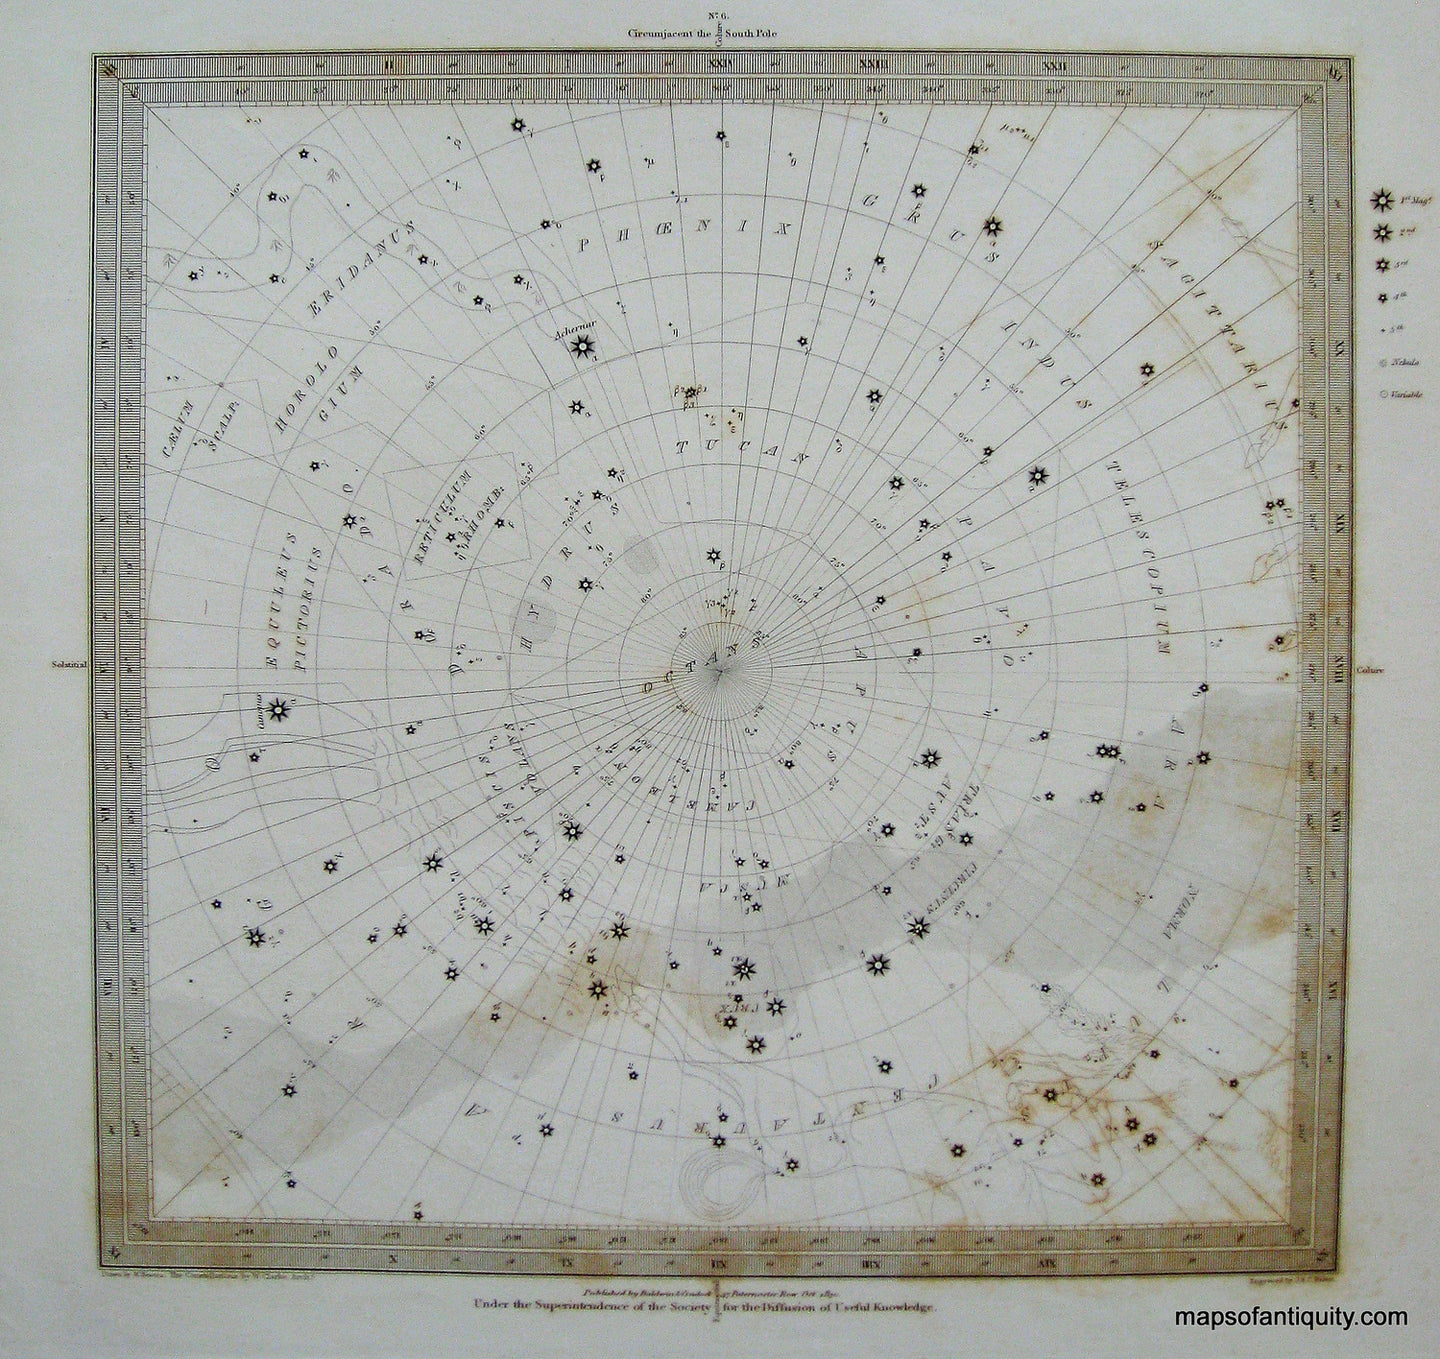 Antique-Engraving-Celestial-Map-No.-6-featuring-Centaurus-Lupus-Hydrus-Circumjacent-the-South-Pole**********-Celestial--1832-SDUK/-Society-for-the-Diffusion-of-Useful-Knowledge-Maps-Of-Antiquity